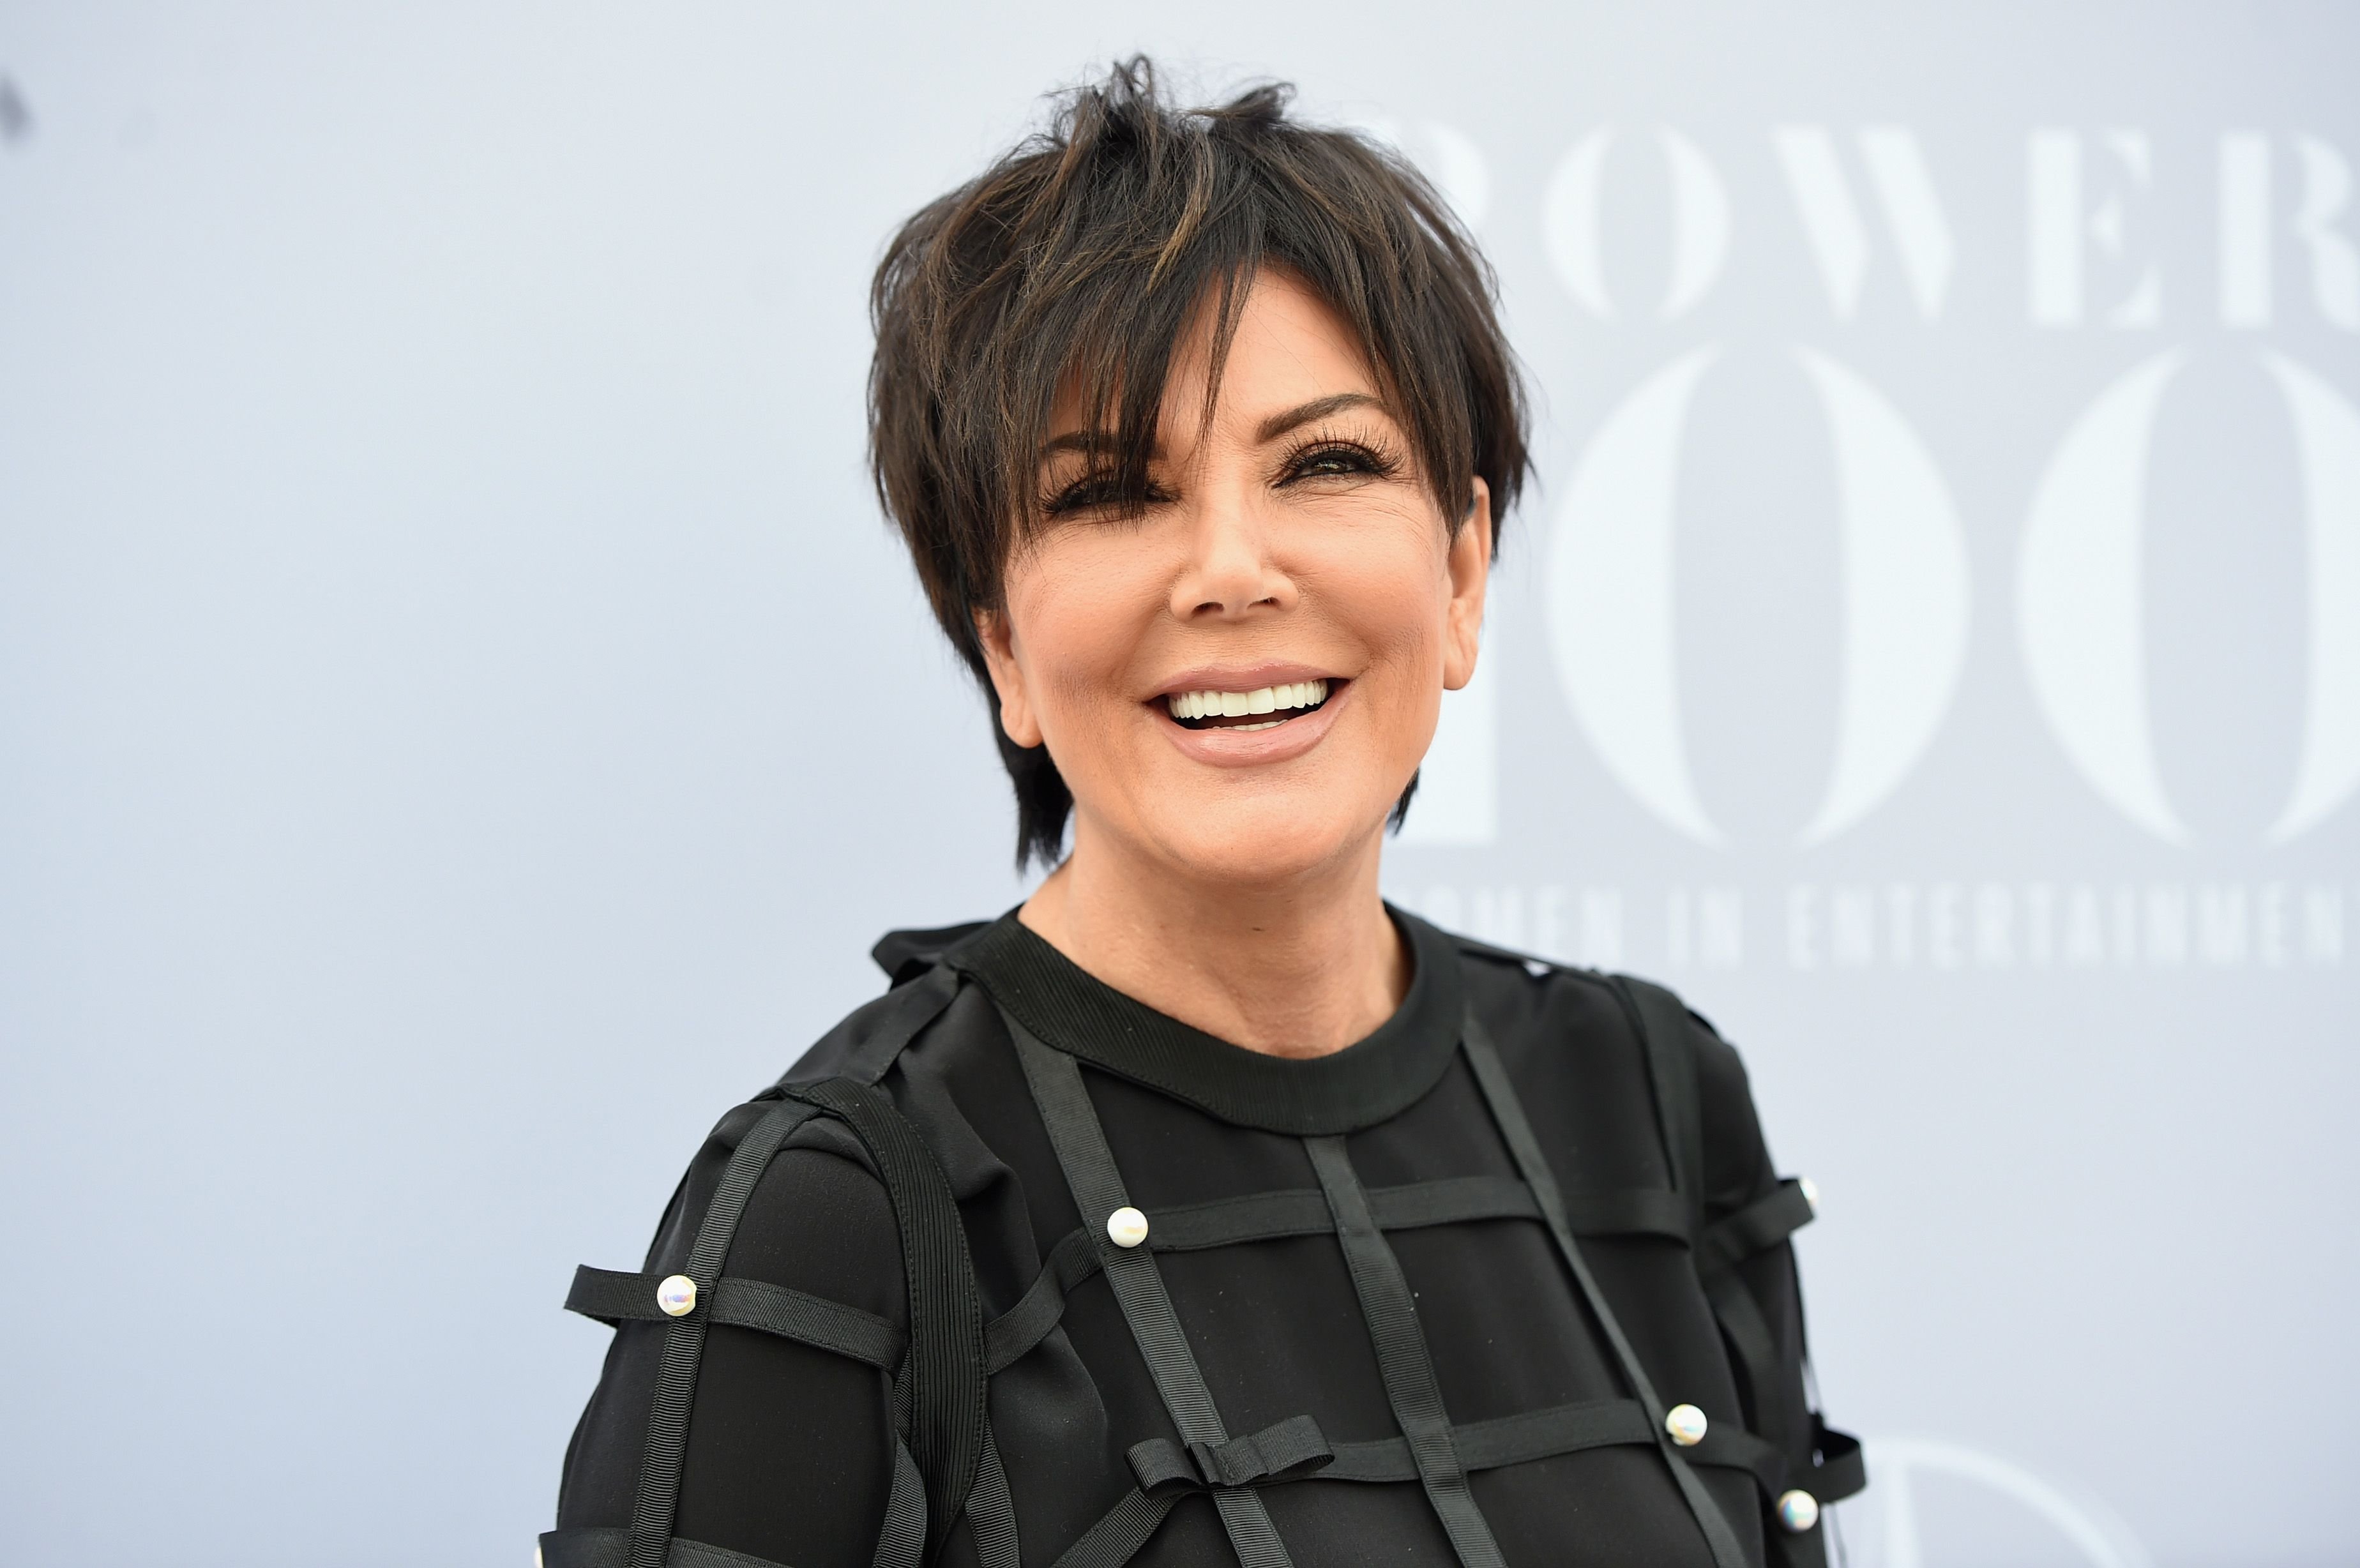 Kris Jenner at the 24th annual Women in Entertainment Breakfast at Milk Studios on December 9, 2015 in Los Angeles, California. | Photo: Getty Images